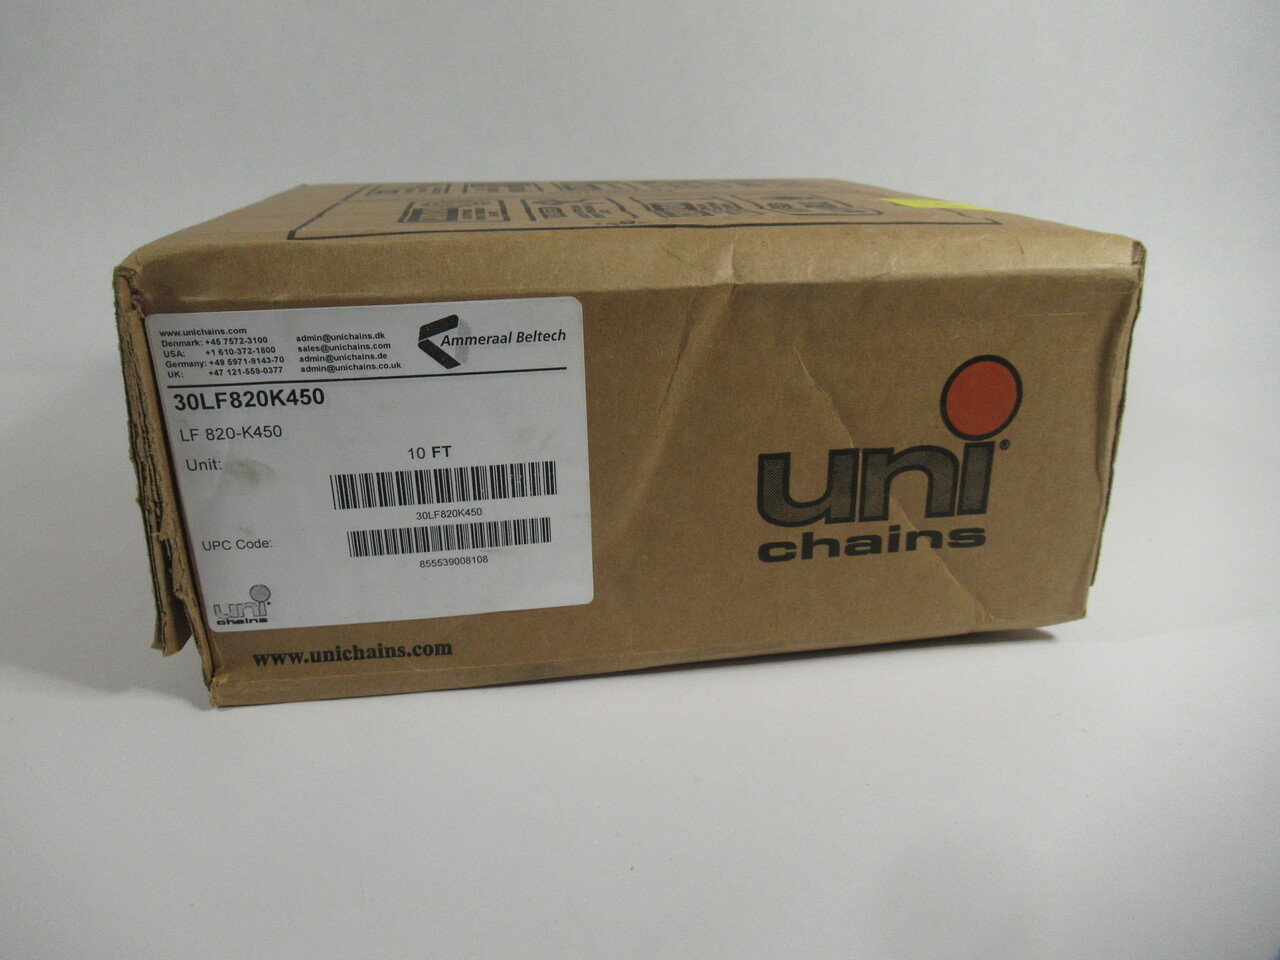 Uni Chains LF820-K450 Table Top Chain 10 FT 4-1/2" Width *Sealed* NEW